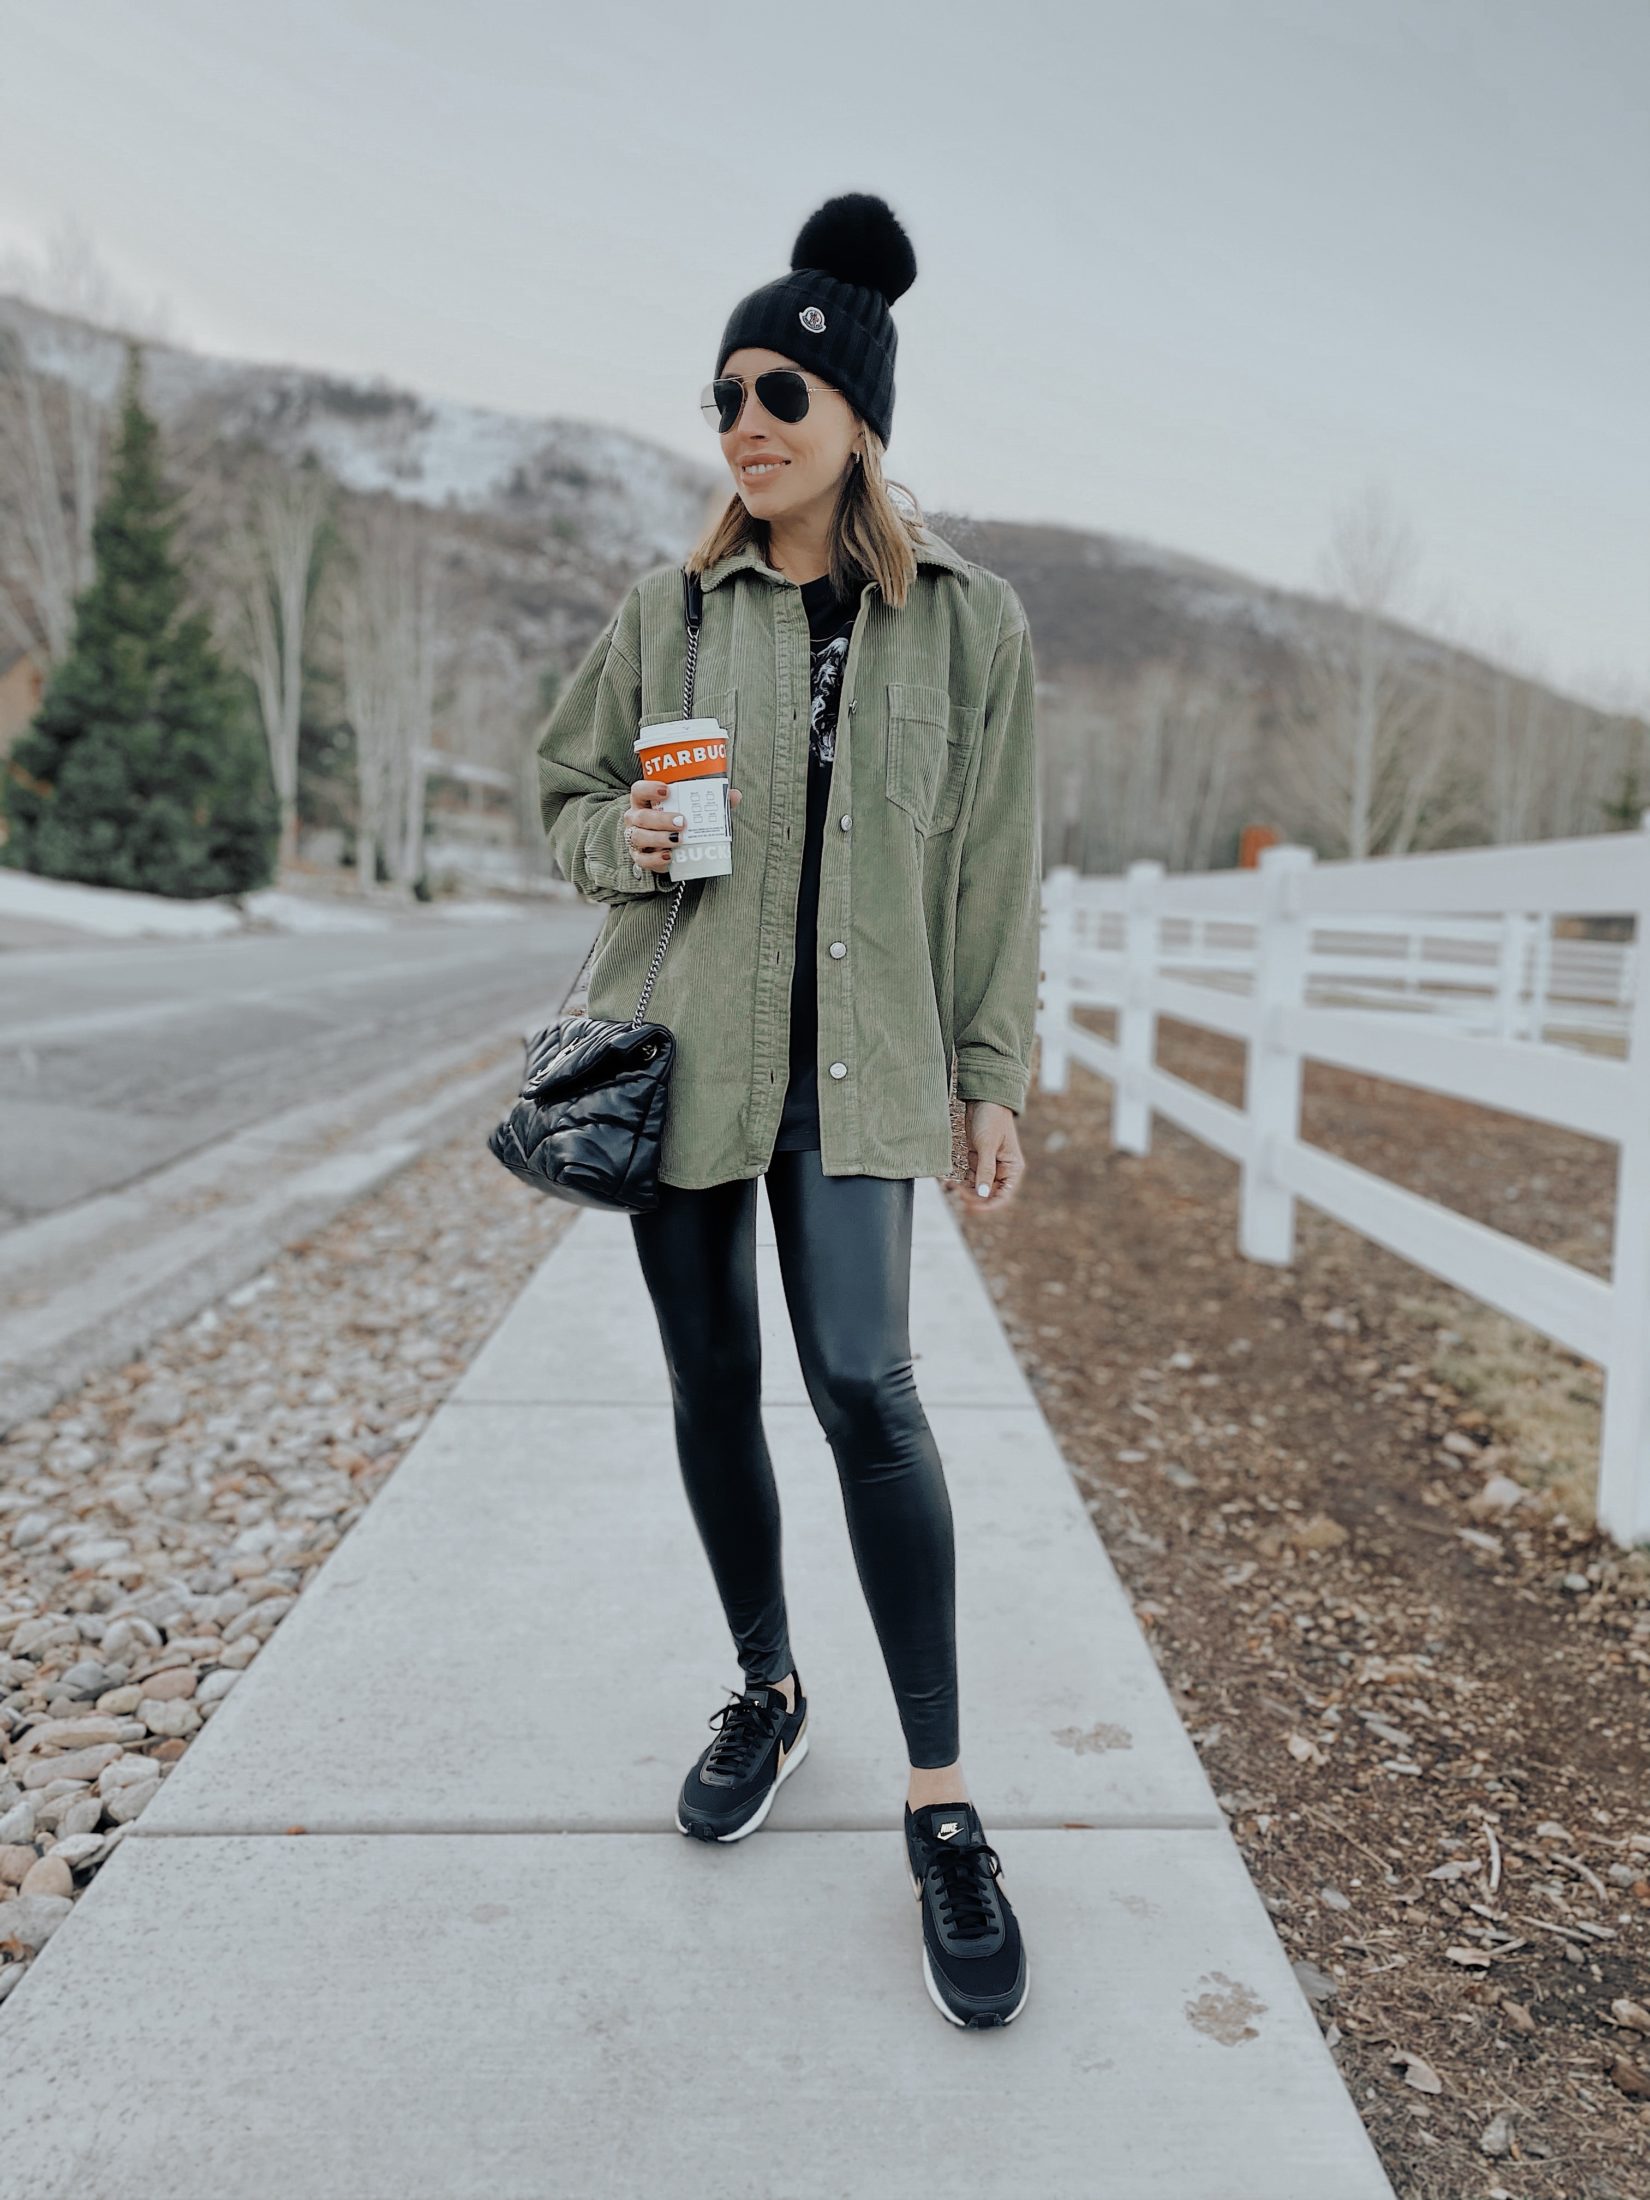 casual outfit for park city in late fall and winter